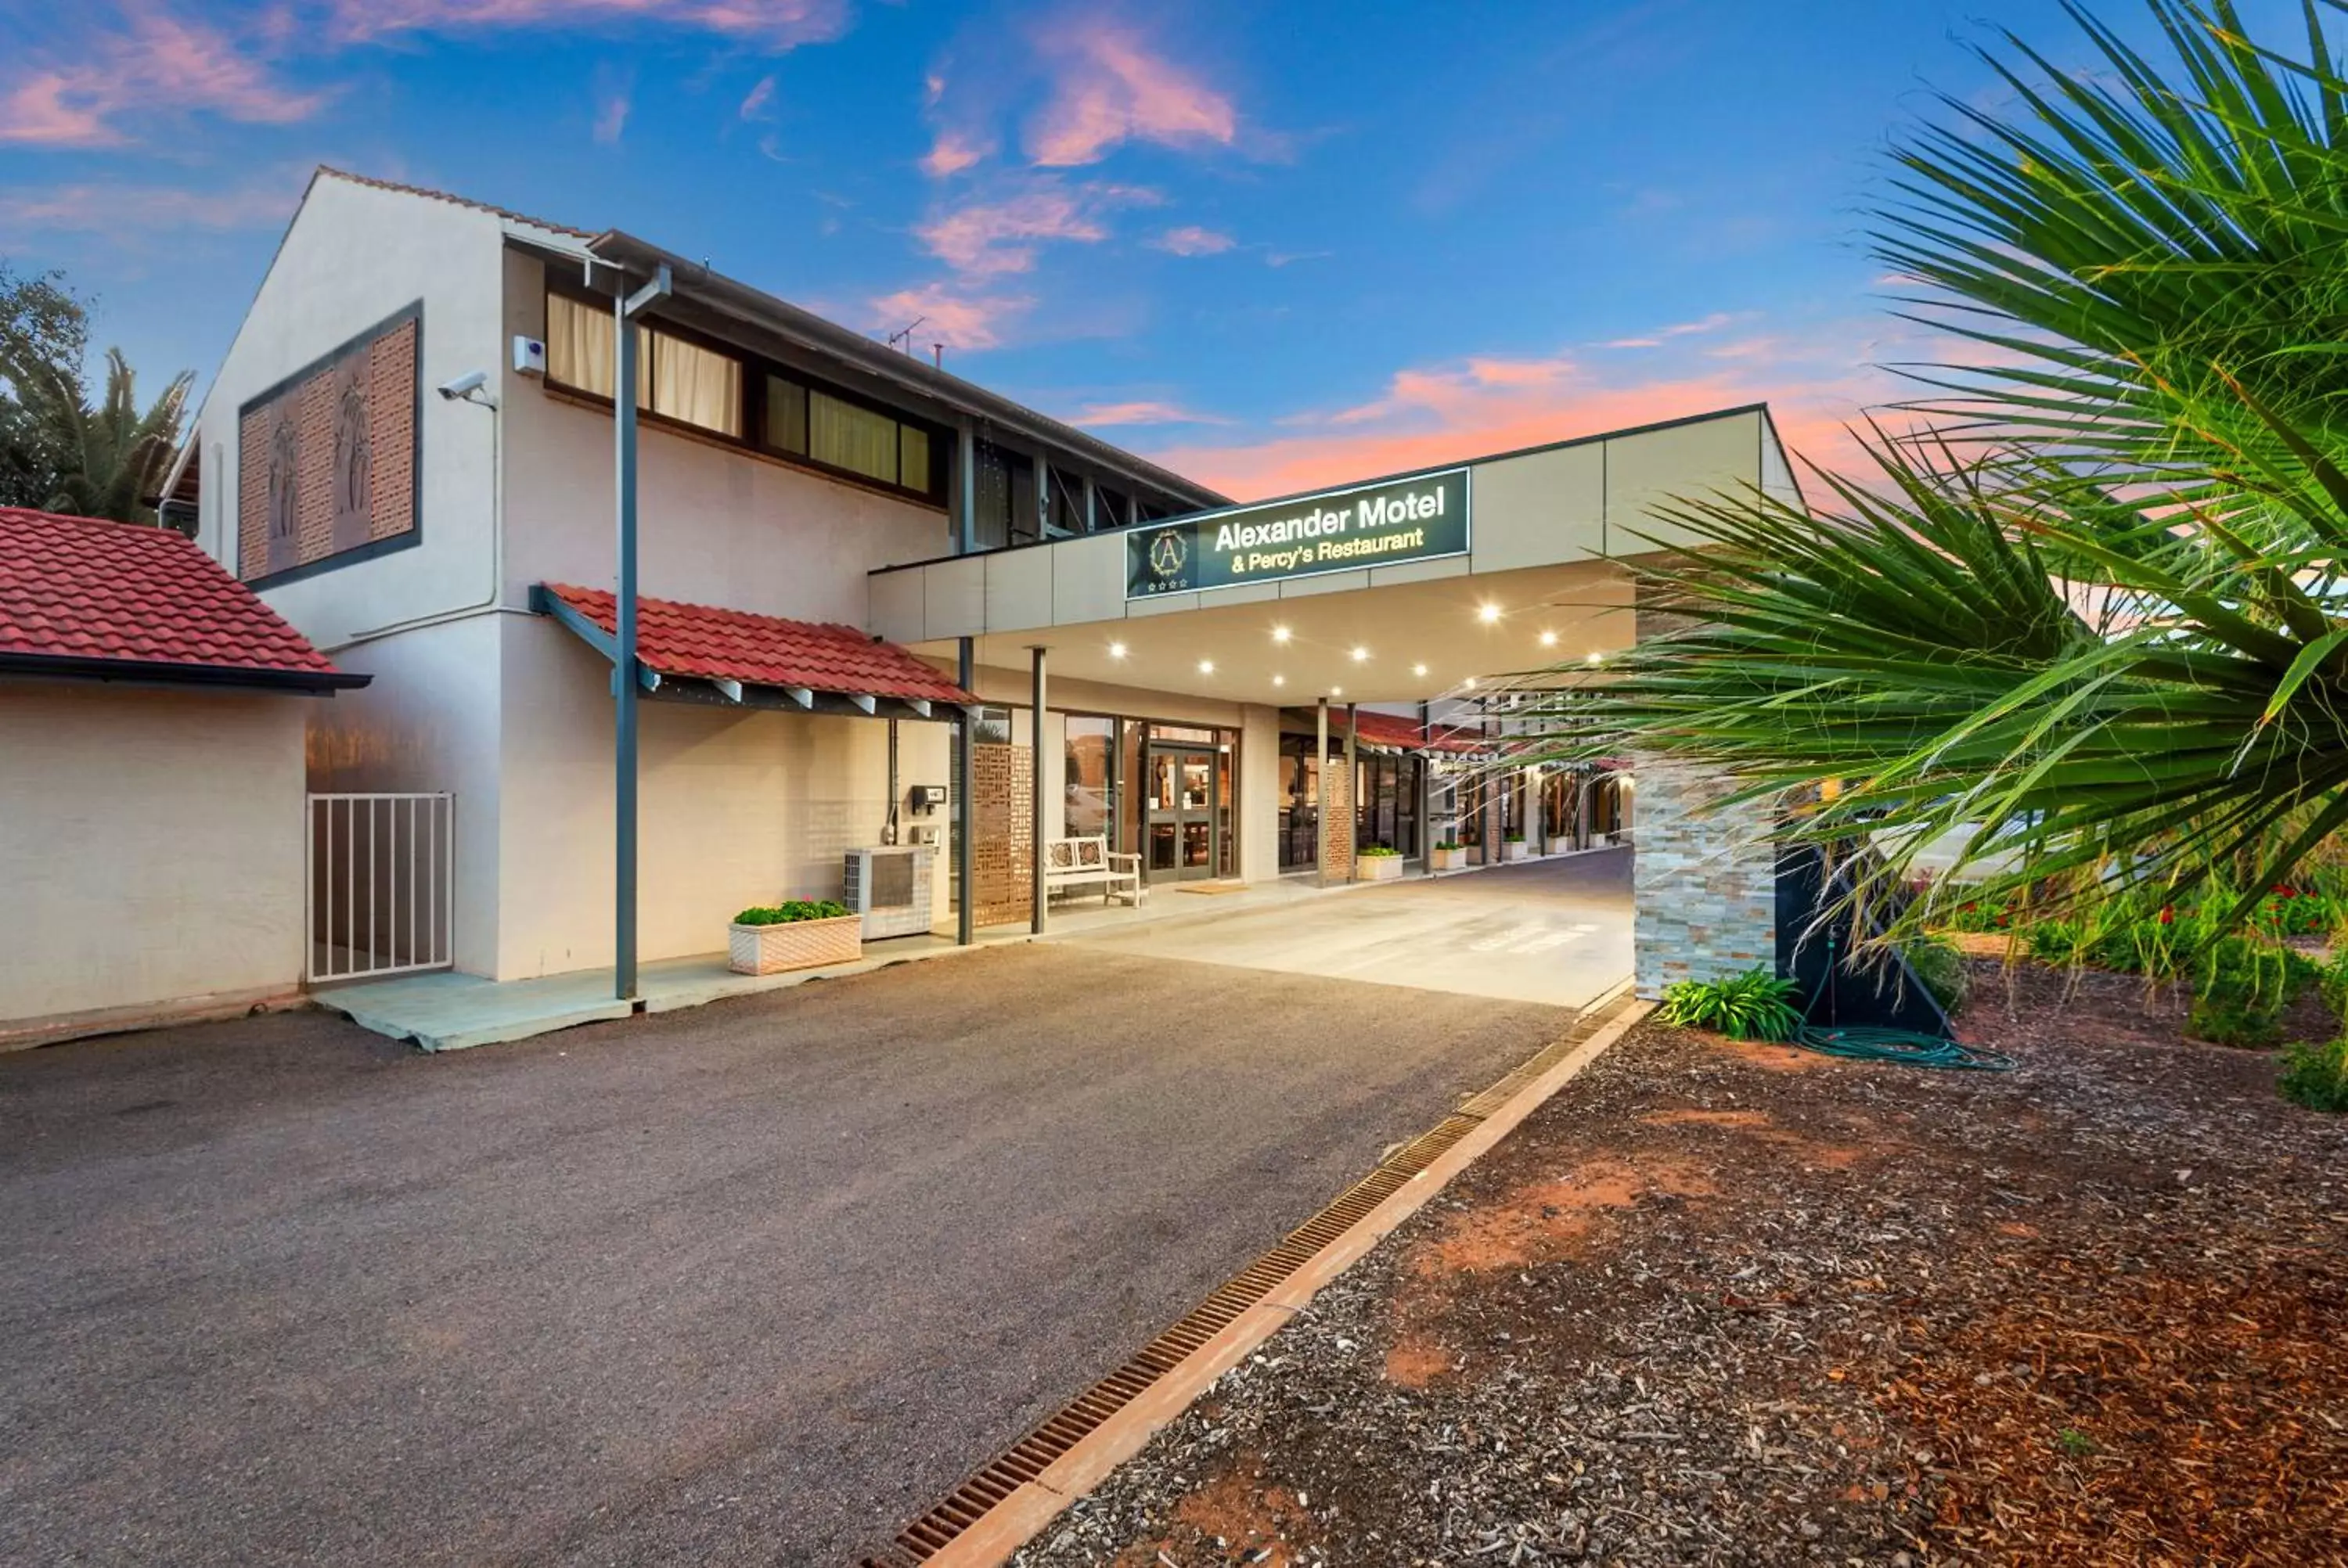 Property Building in Comfort Inn Whyalla